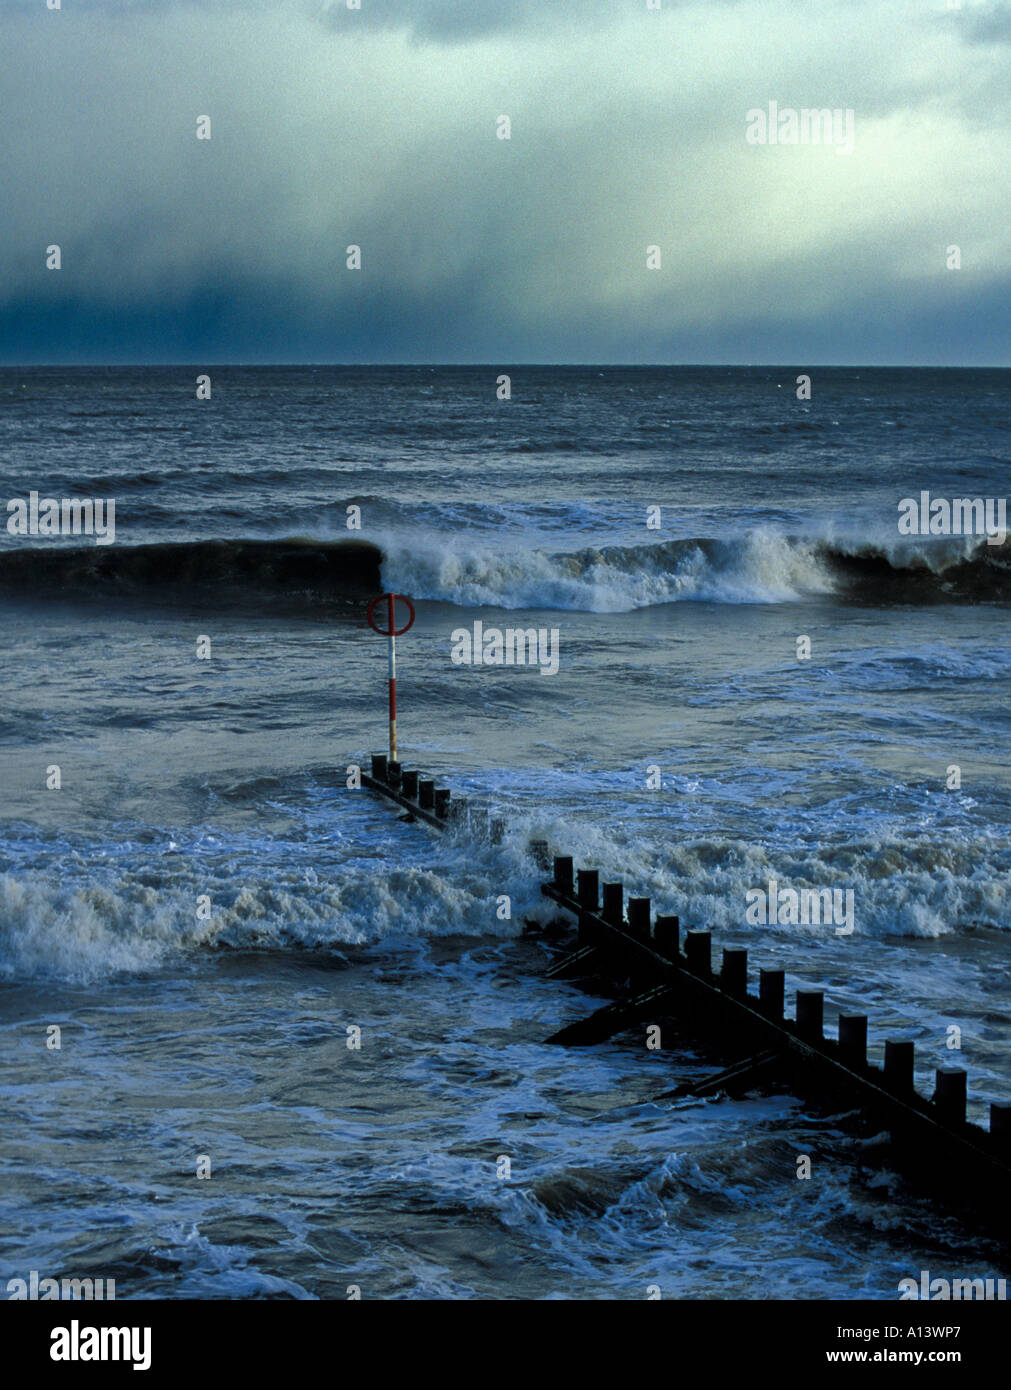 A portrait image of moody Aberdeen beach North sea with a wooden groin extending into the stormy sea waves. Stock Photo